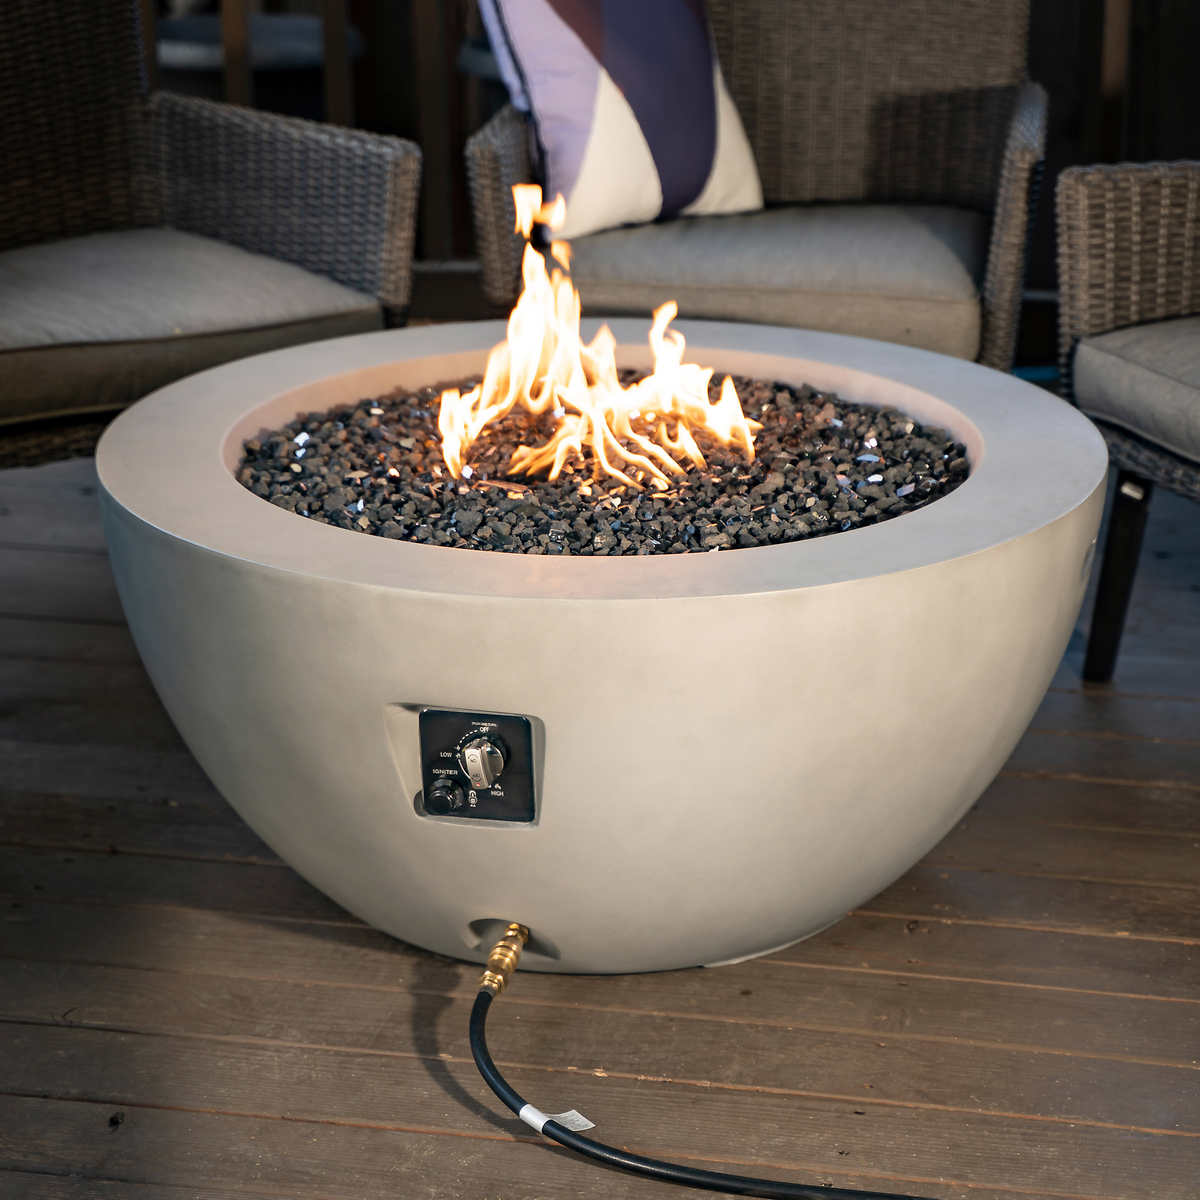 Faux Concrete Gas Fire Pit Costco, How To Install Fire Glass In Fire Pit